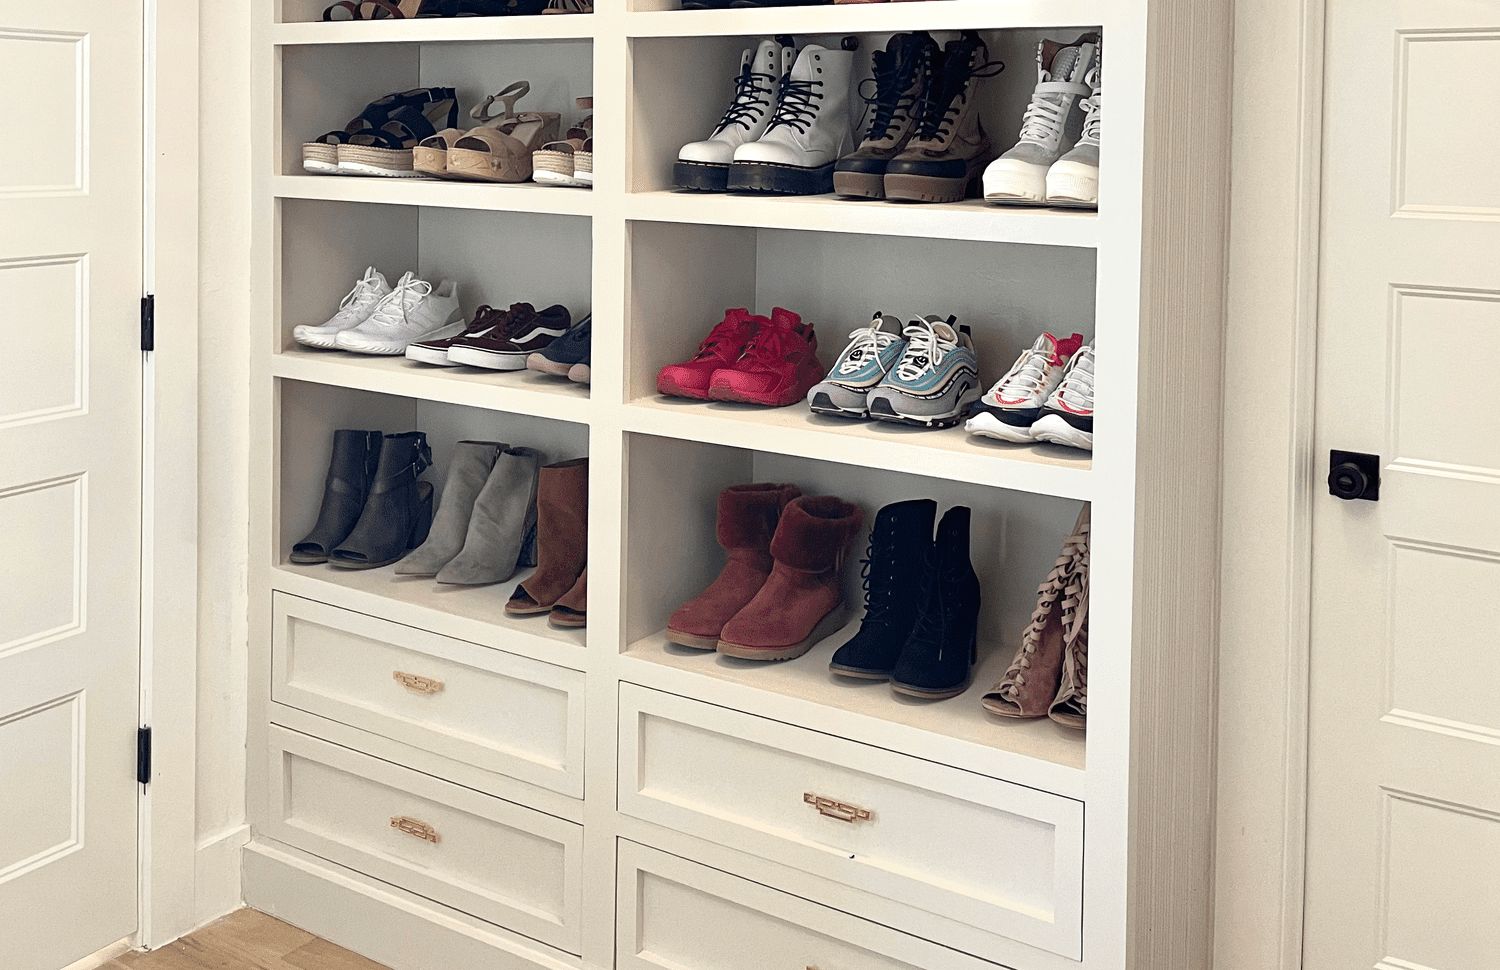 Space Of The Week: Diy Floor To Ceiling Shoe Storage Wall Pertaining To Wardrobes Shoe Storages (Gallery 1 of 20)